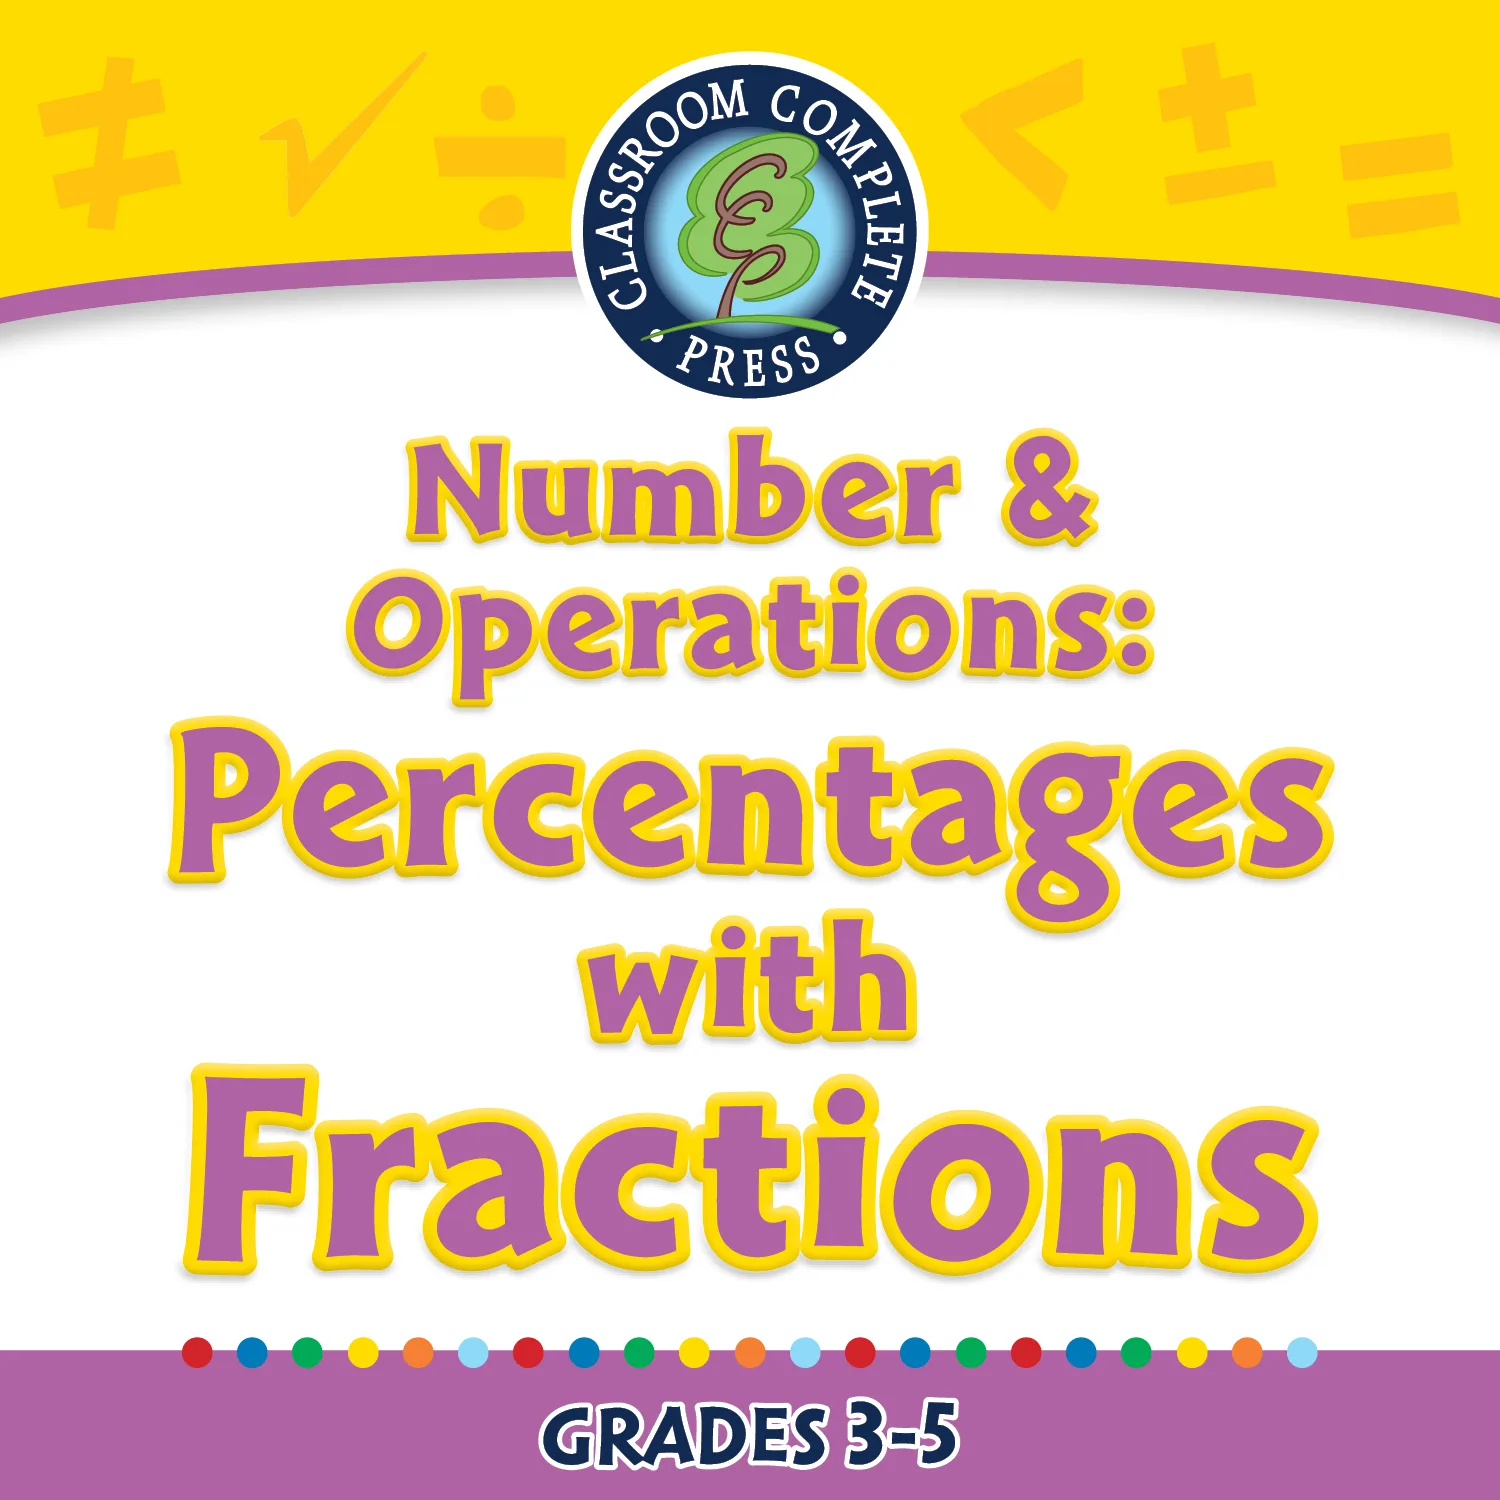 An educational teaching resource from Classroom Complete Press entitled Number & Operations: Percentages with Fractions - FLASH-PC downloadable at Teach Simple.